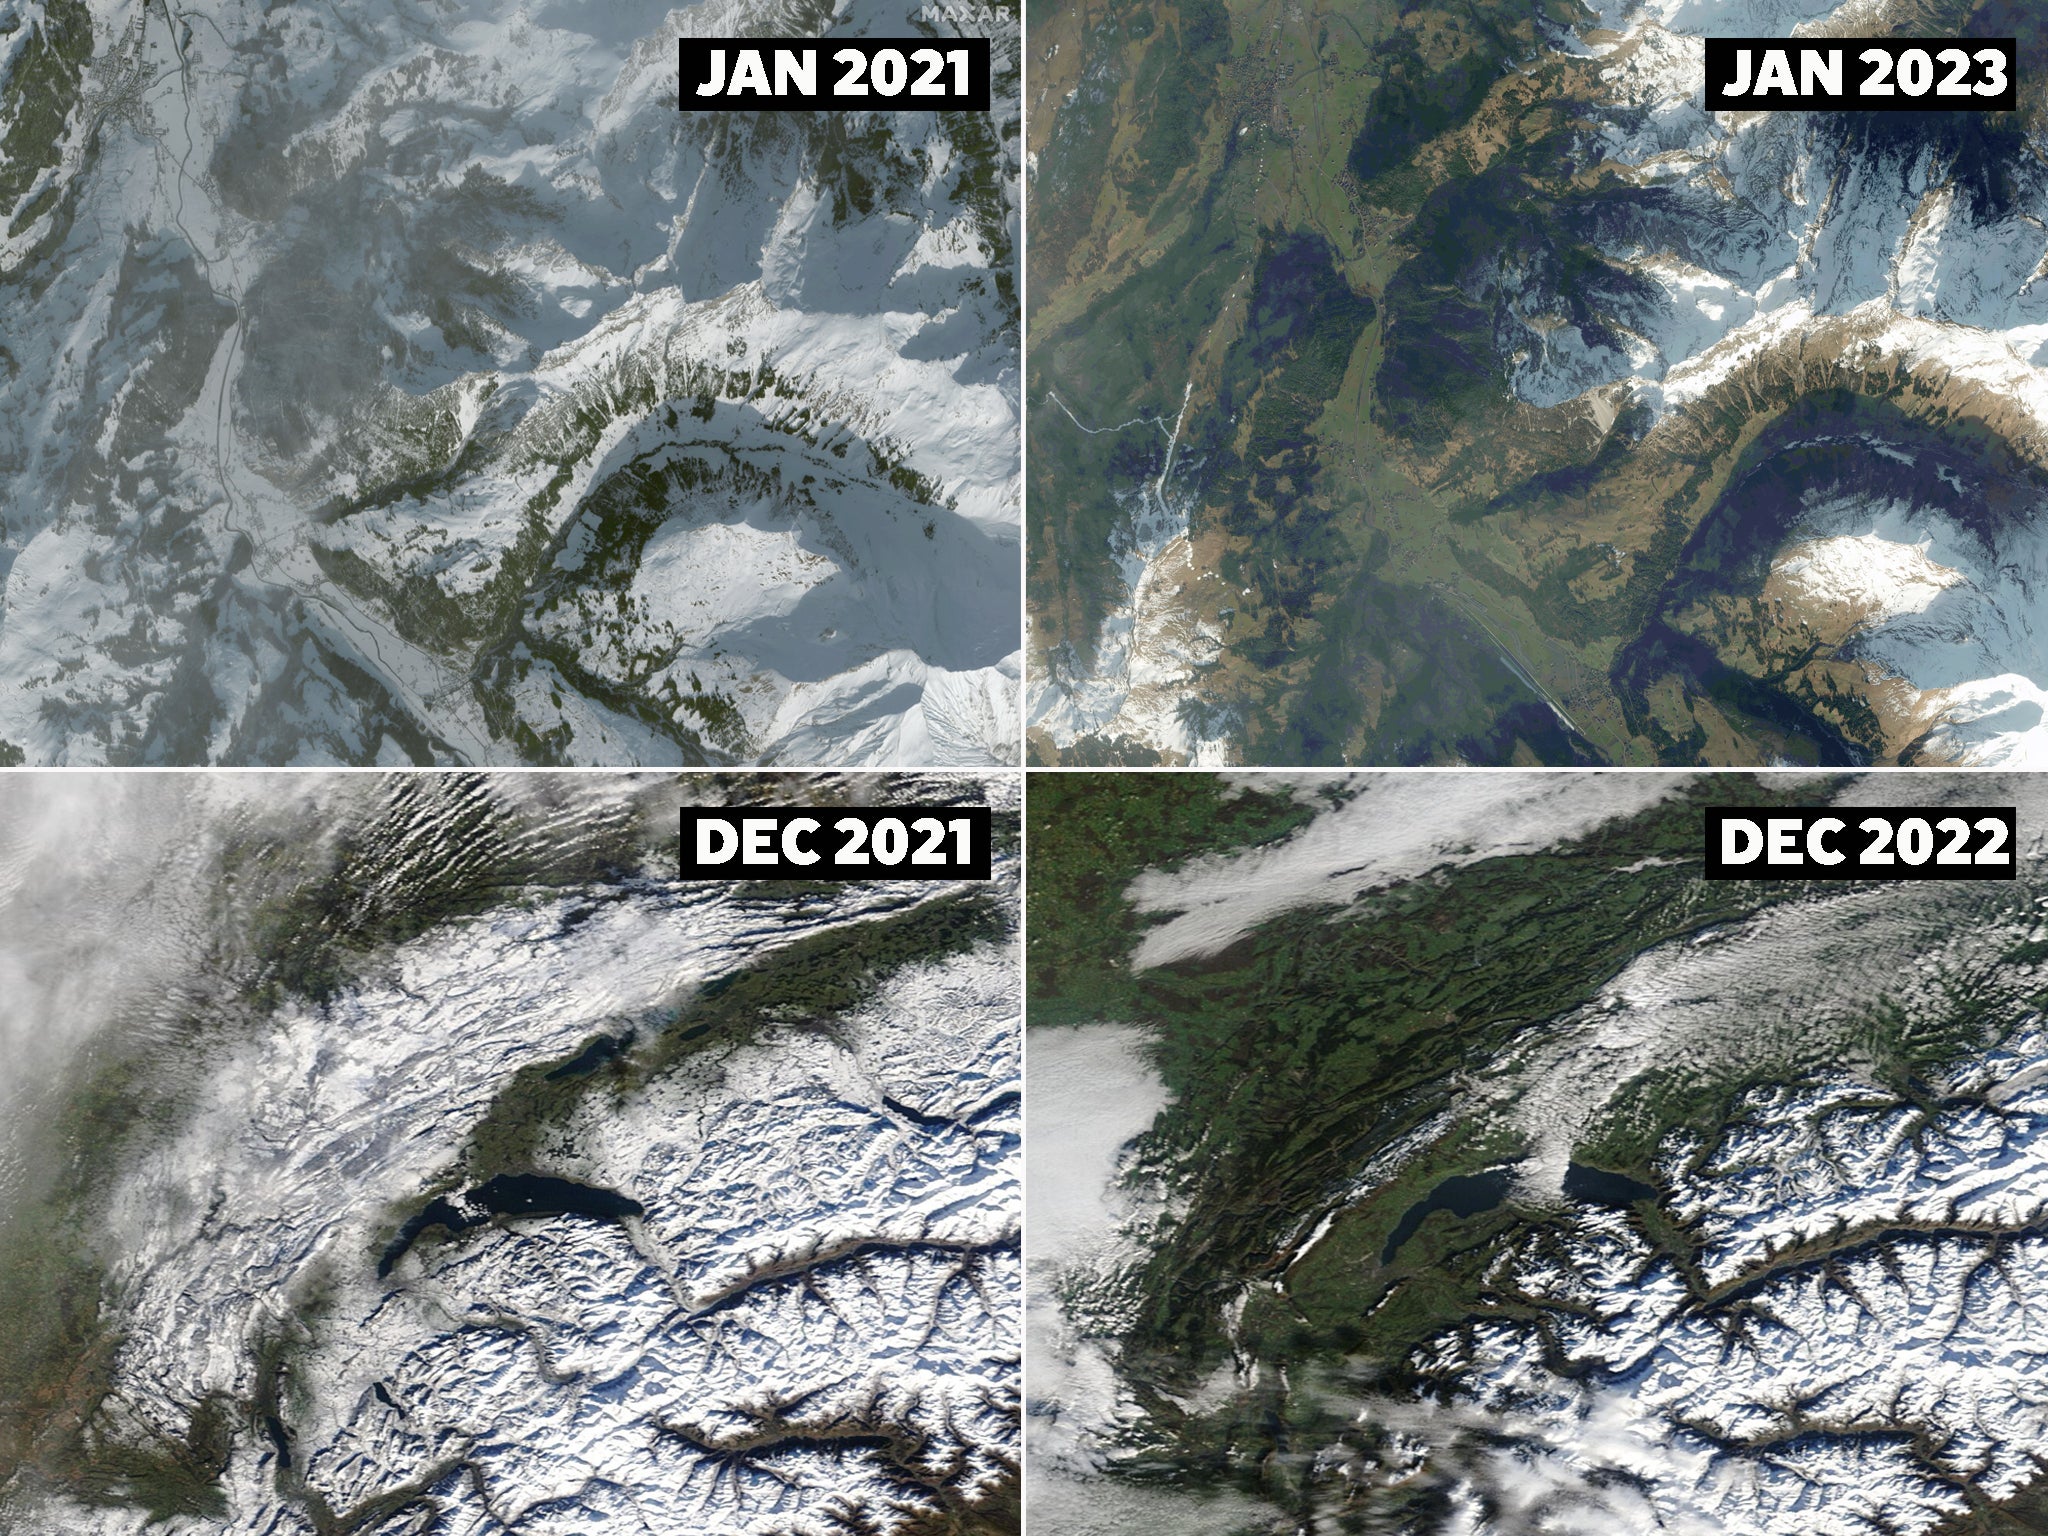 Snow cover comparison shows the decline in Adelboden and St Stephan in Switzerland